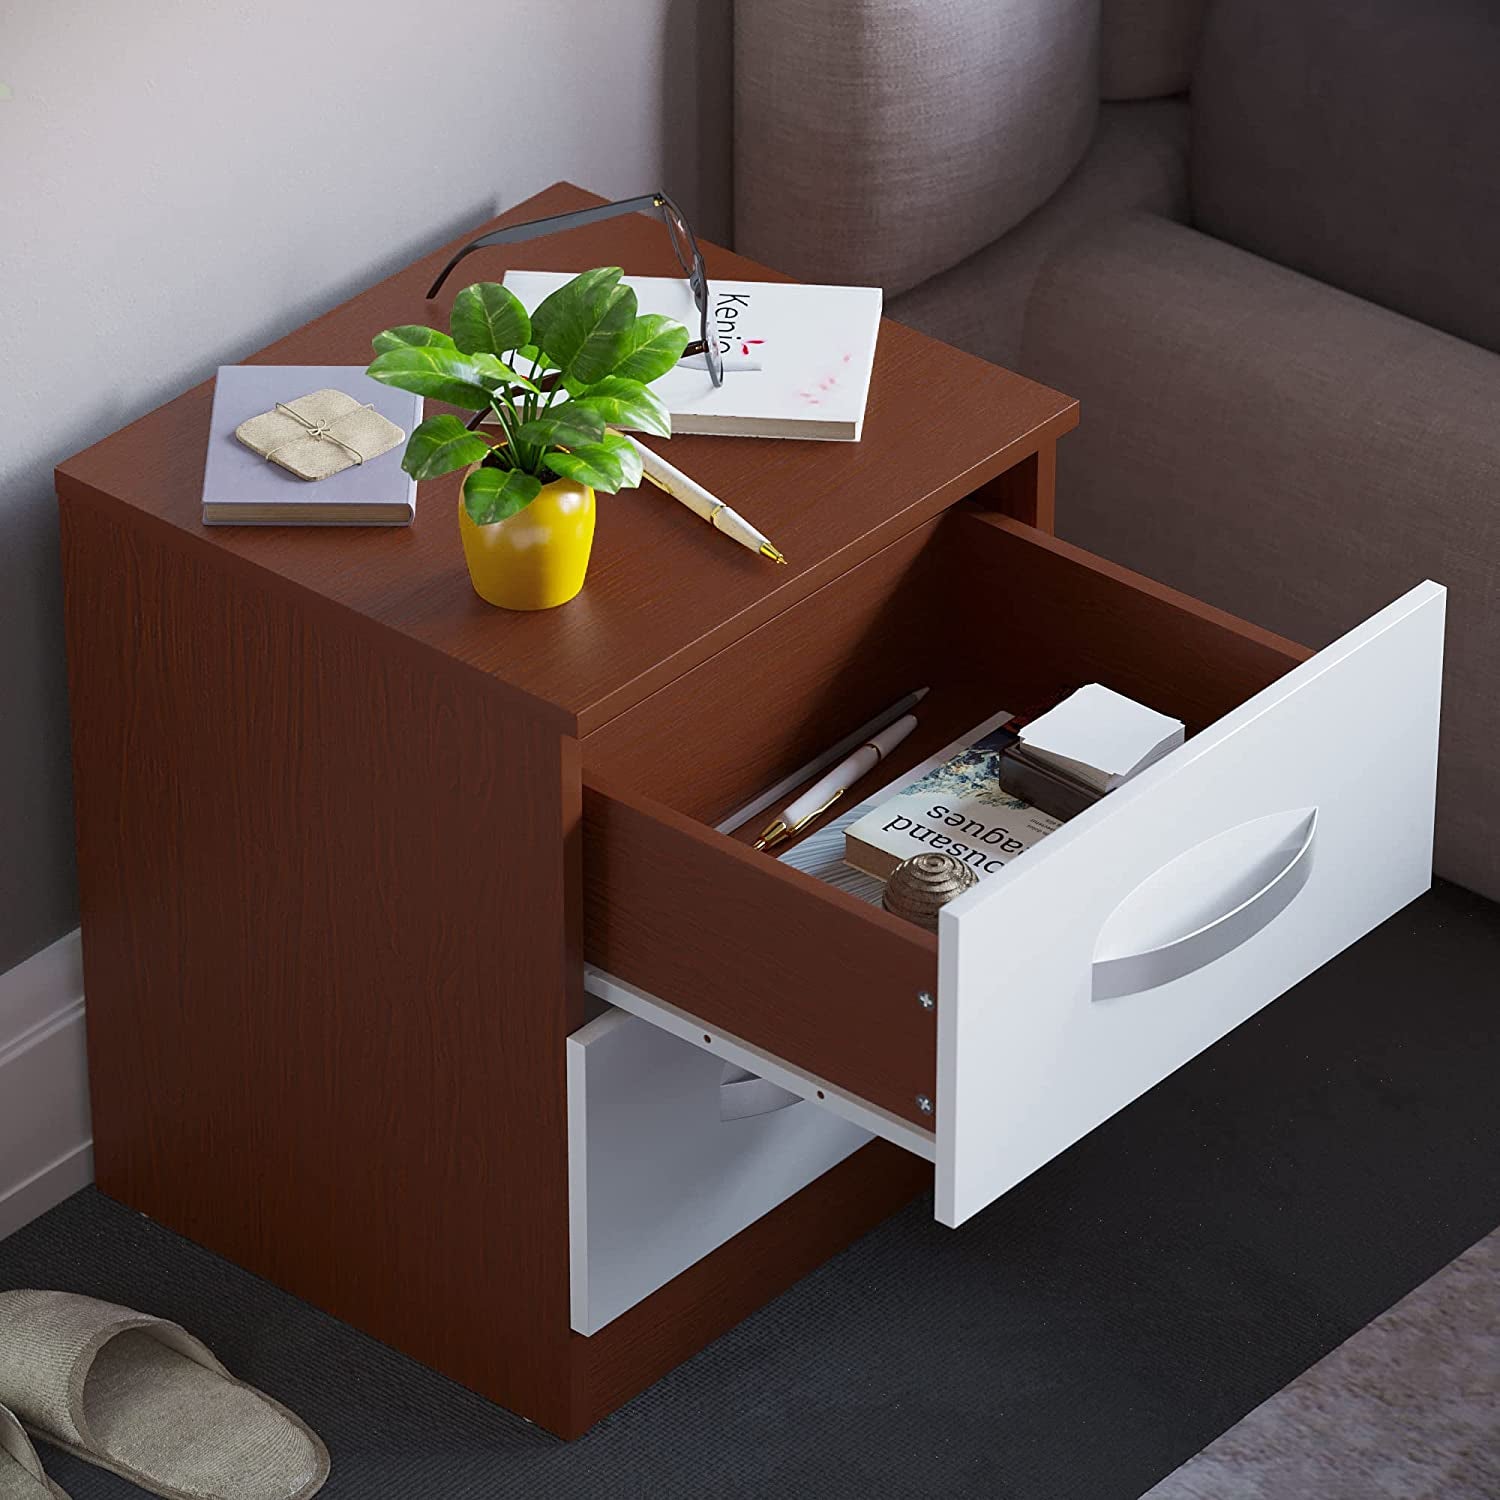 Amazon Brand - Movian High Gloss 2 Drawer Bedside Cabinet, White and Walnut, 47 X 40 X 36 Cm